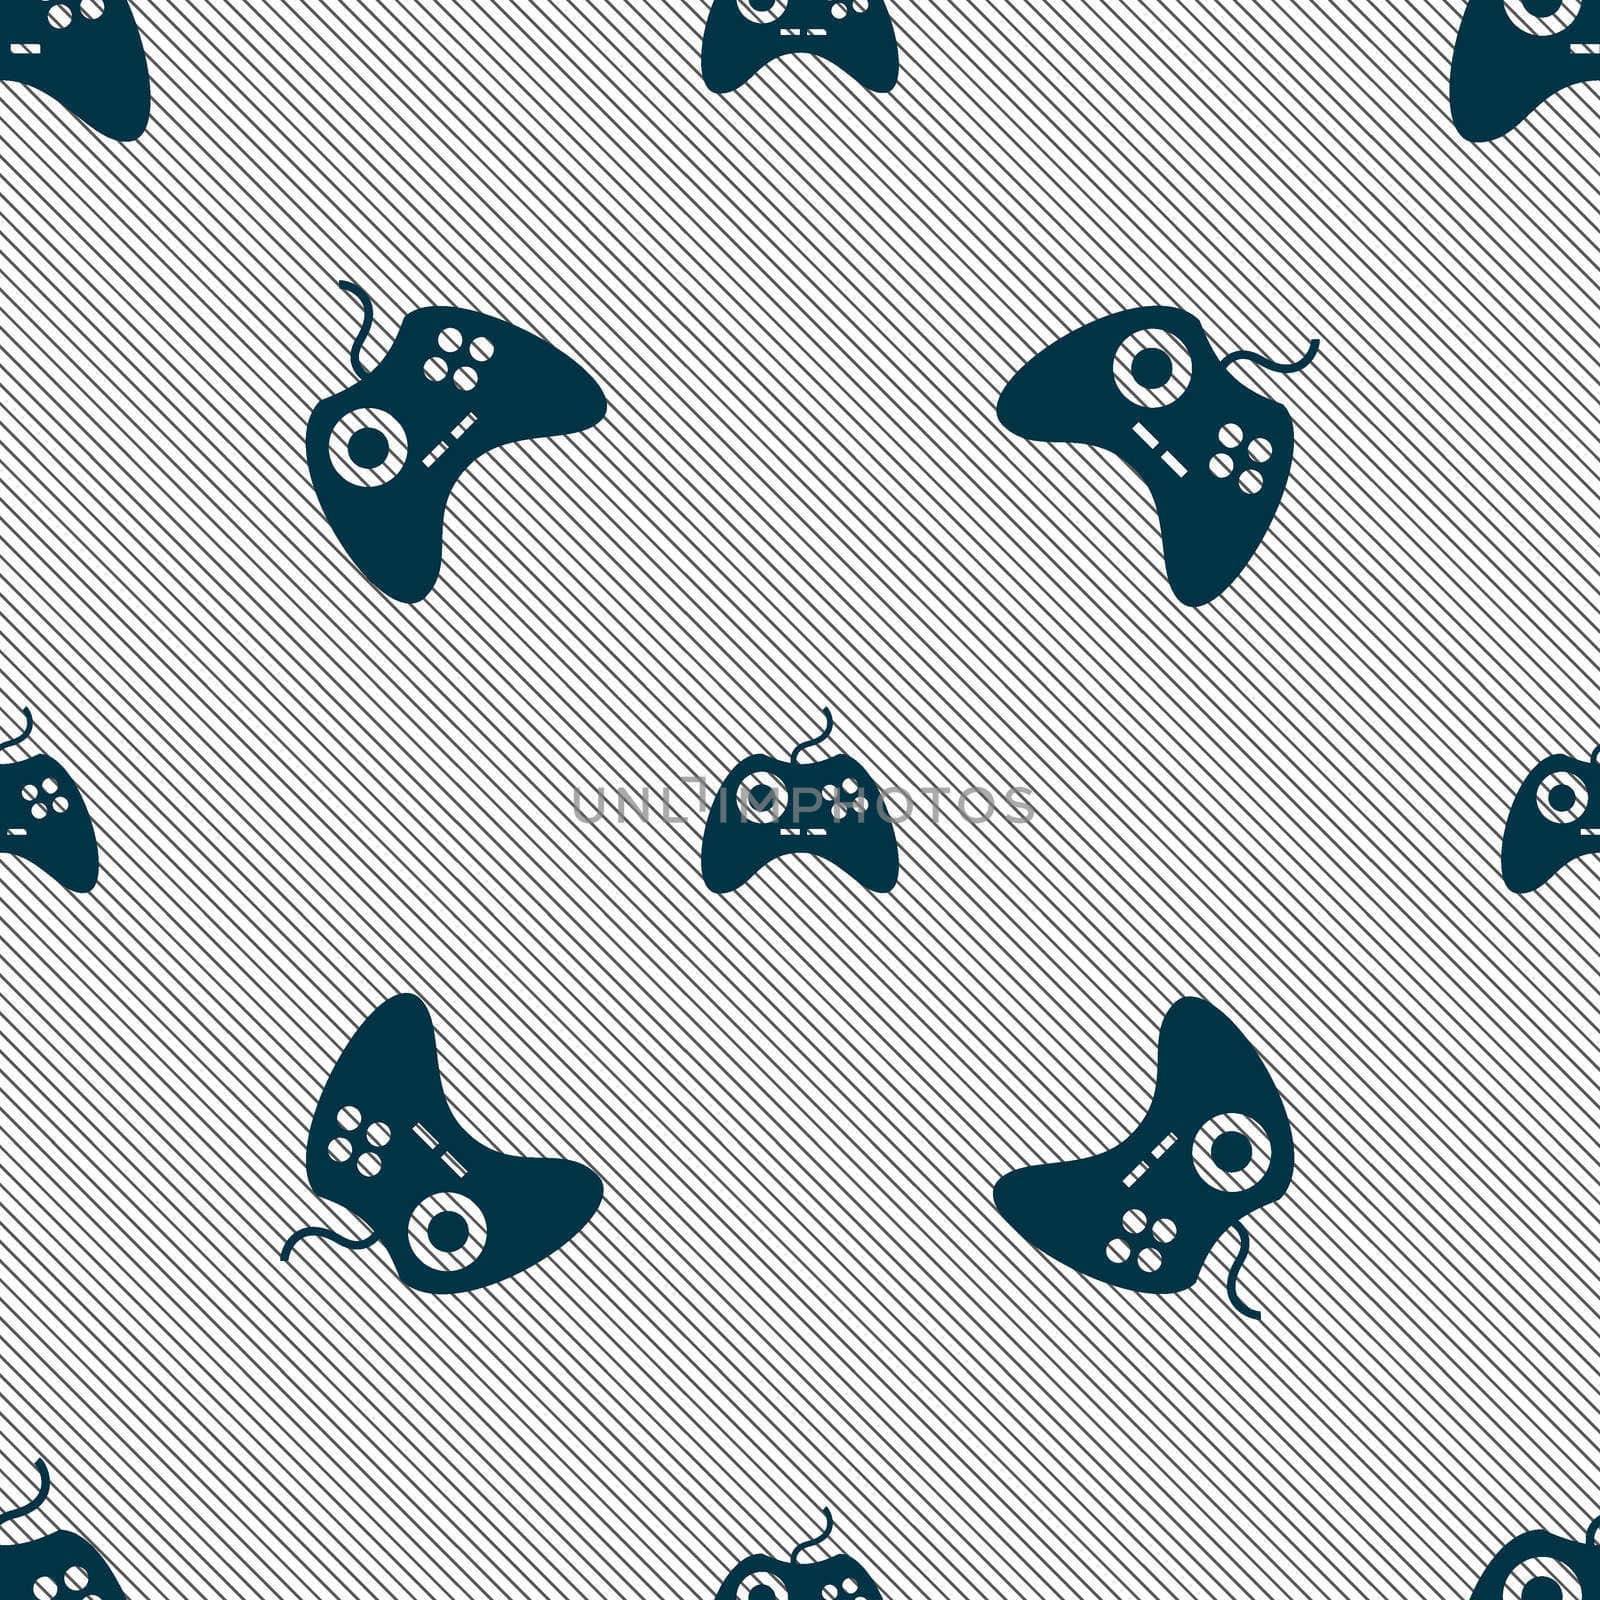 Joystick sign icon. Video game symbol. Seamless pattern with geometric texture. illustration